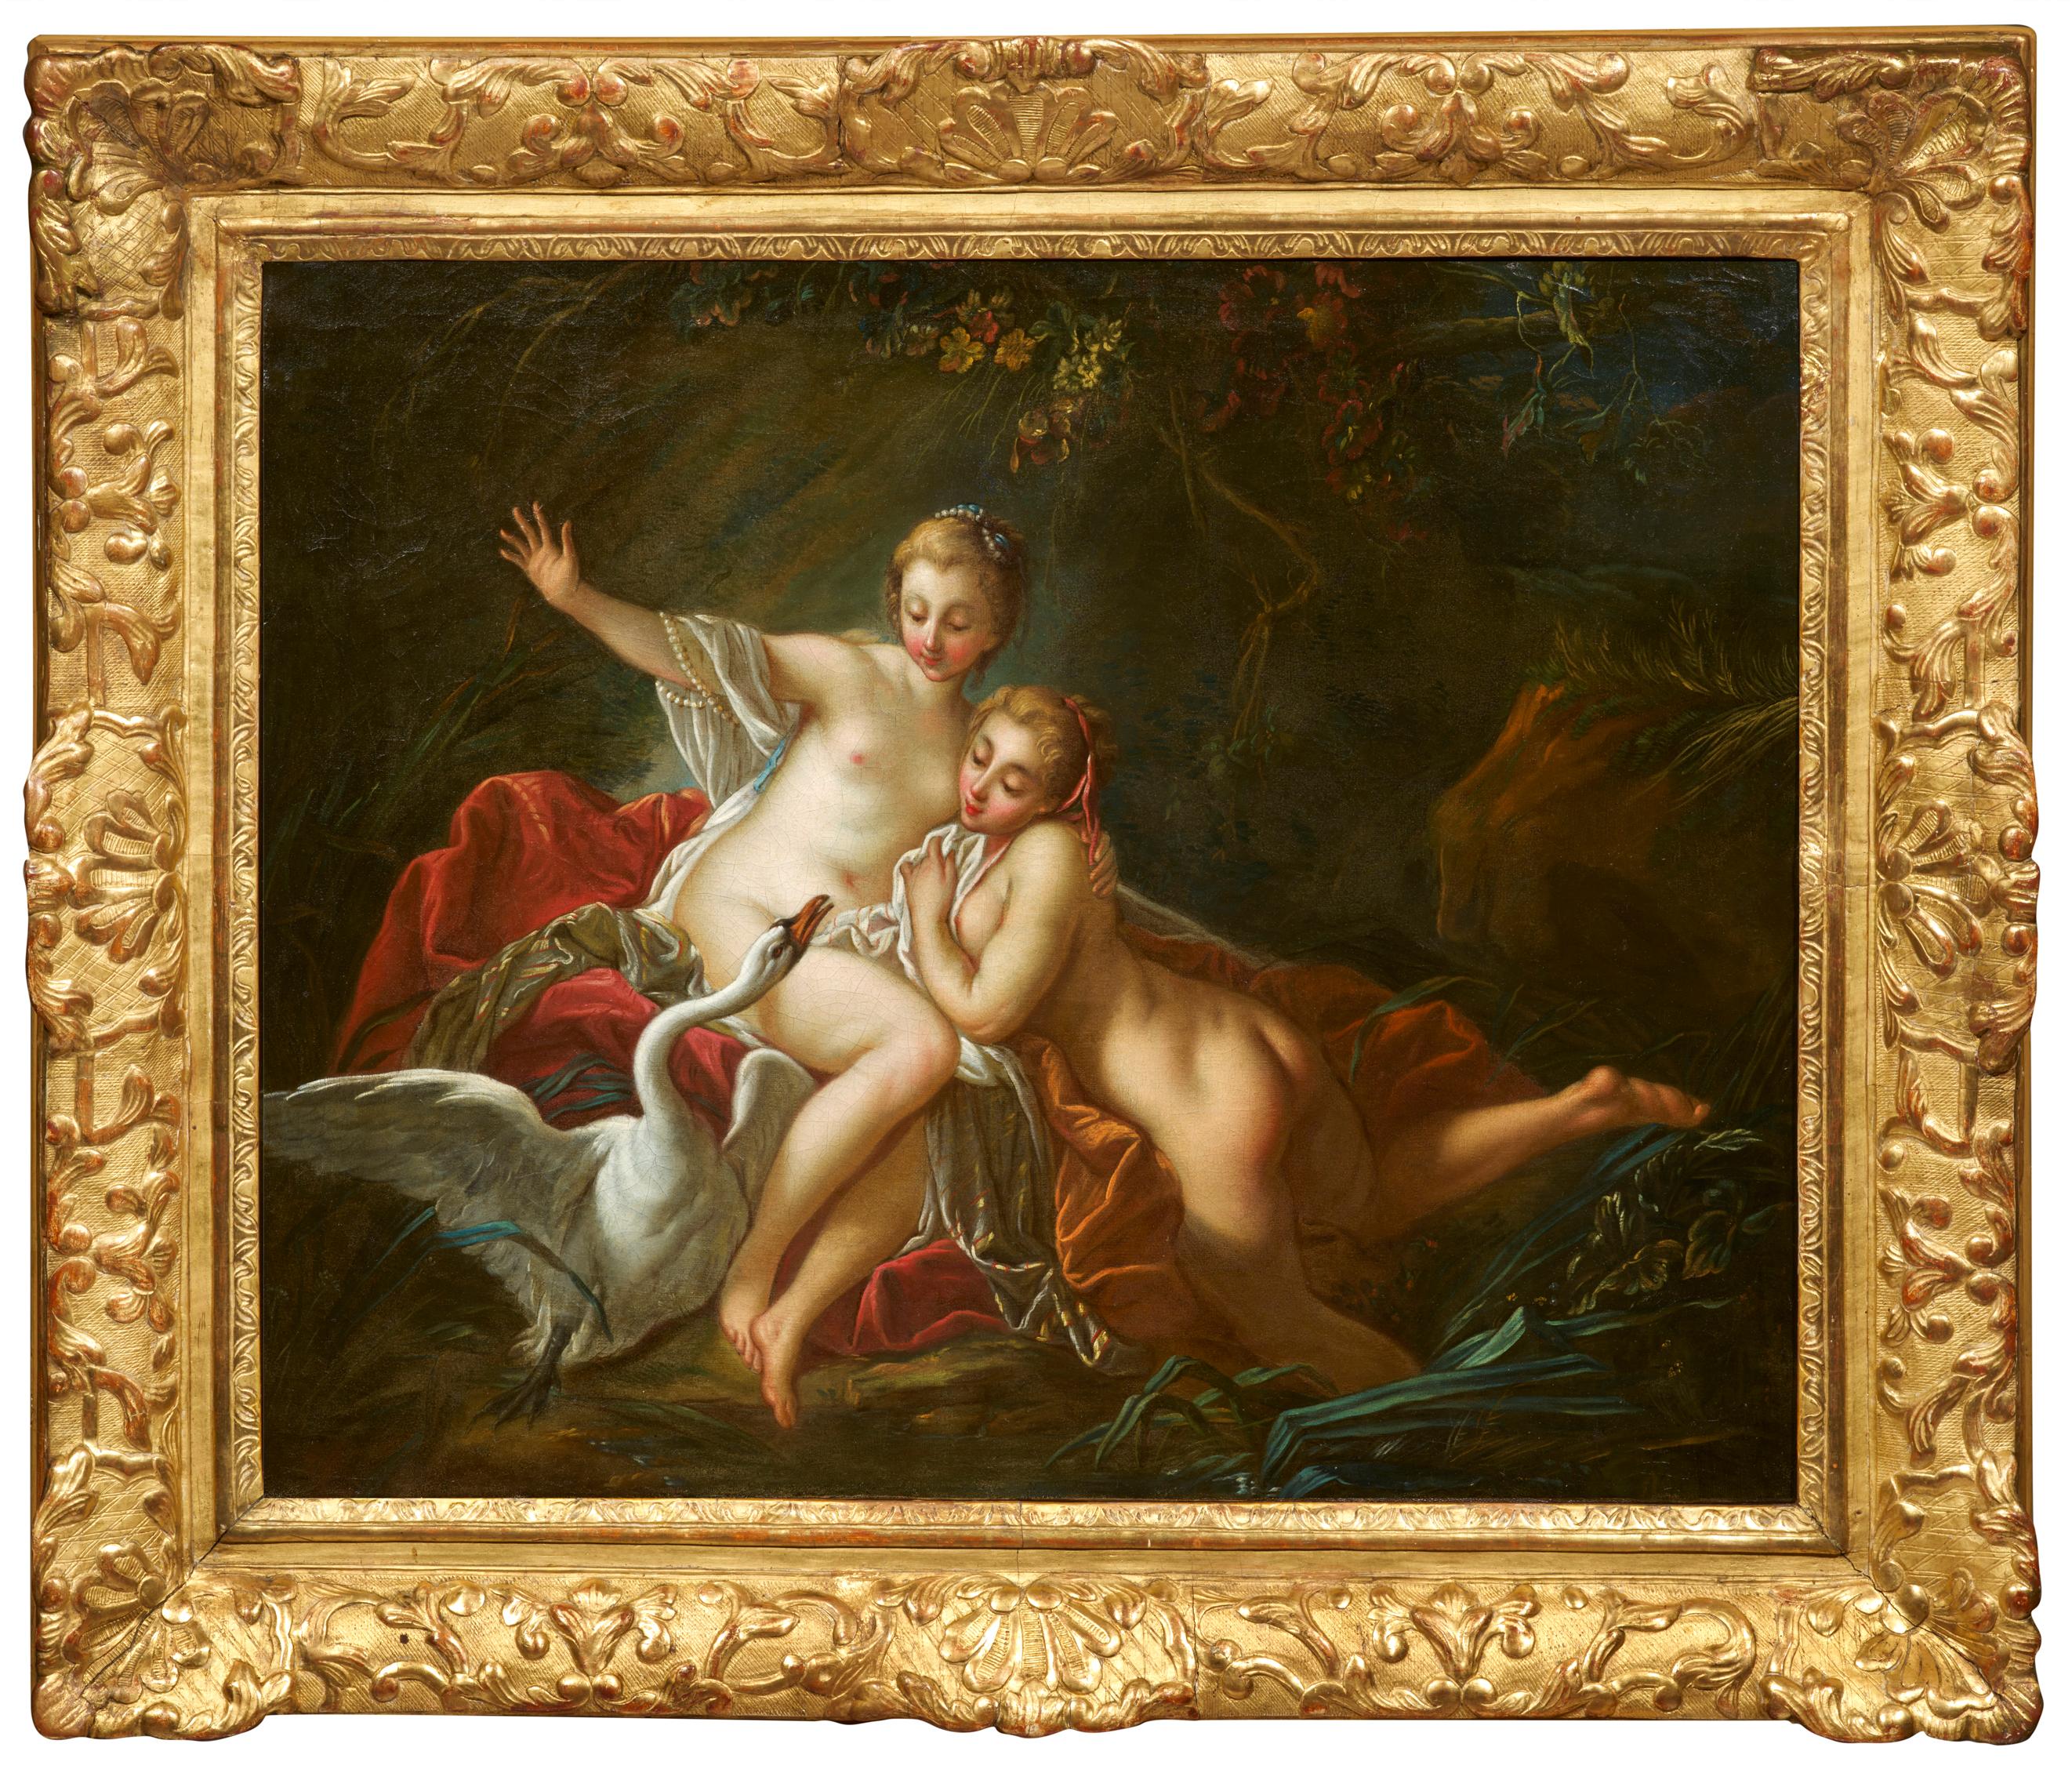 Leda and the Swan by the workshop of Francois Boucher (Paris 1703 - 1770)  - Painting by François Boucher